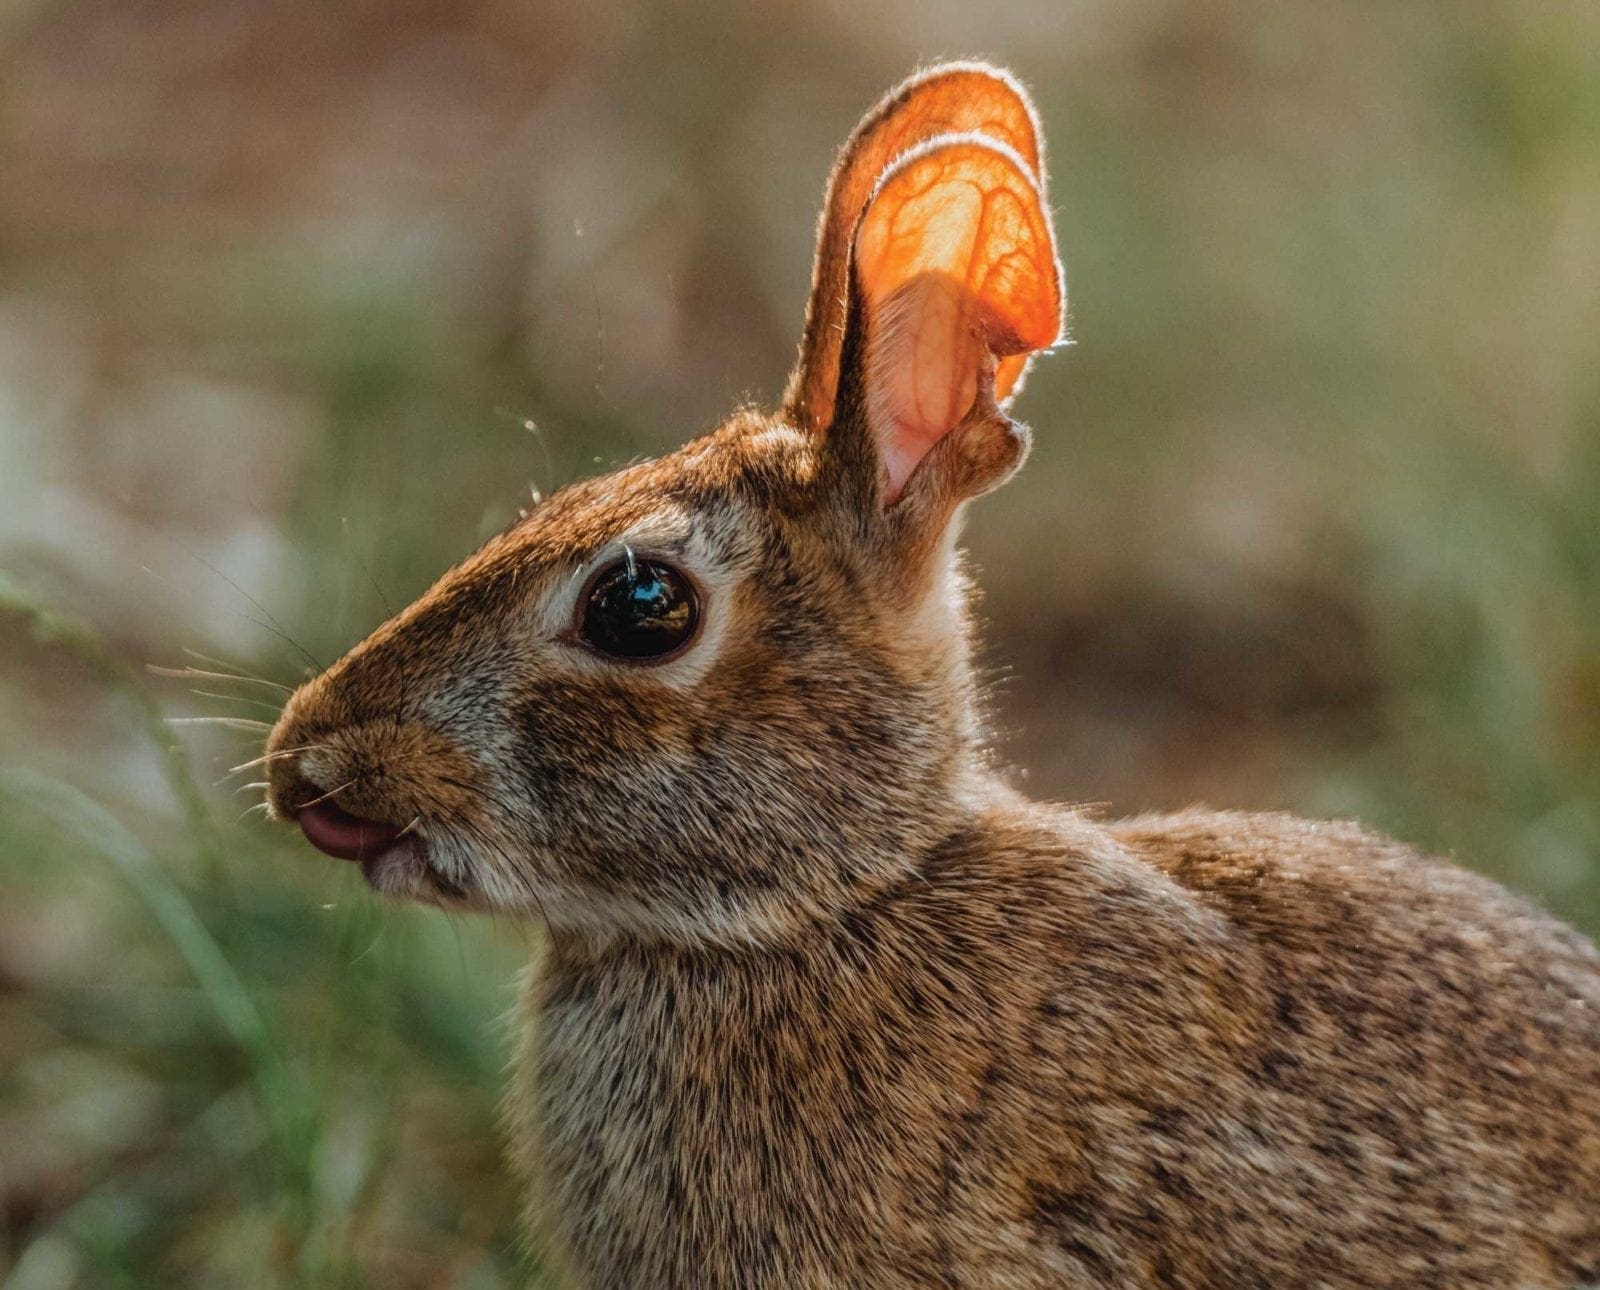 https://projectupland.com/wp-content/uploads/2020/02/Eastern-Cottontail-Rabbit-%E2%80%93-History-Hunting-and-Biology-4-1600x1290.jpg